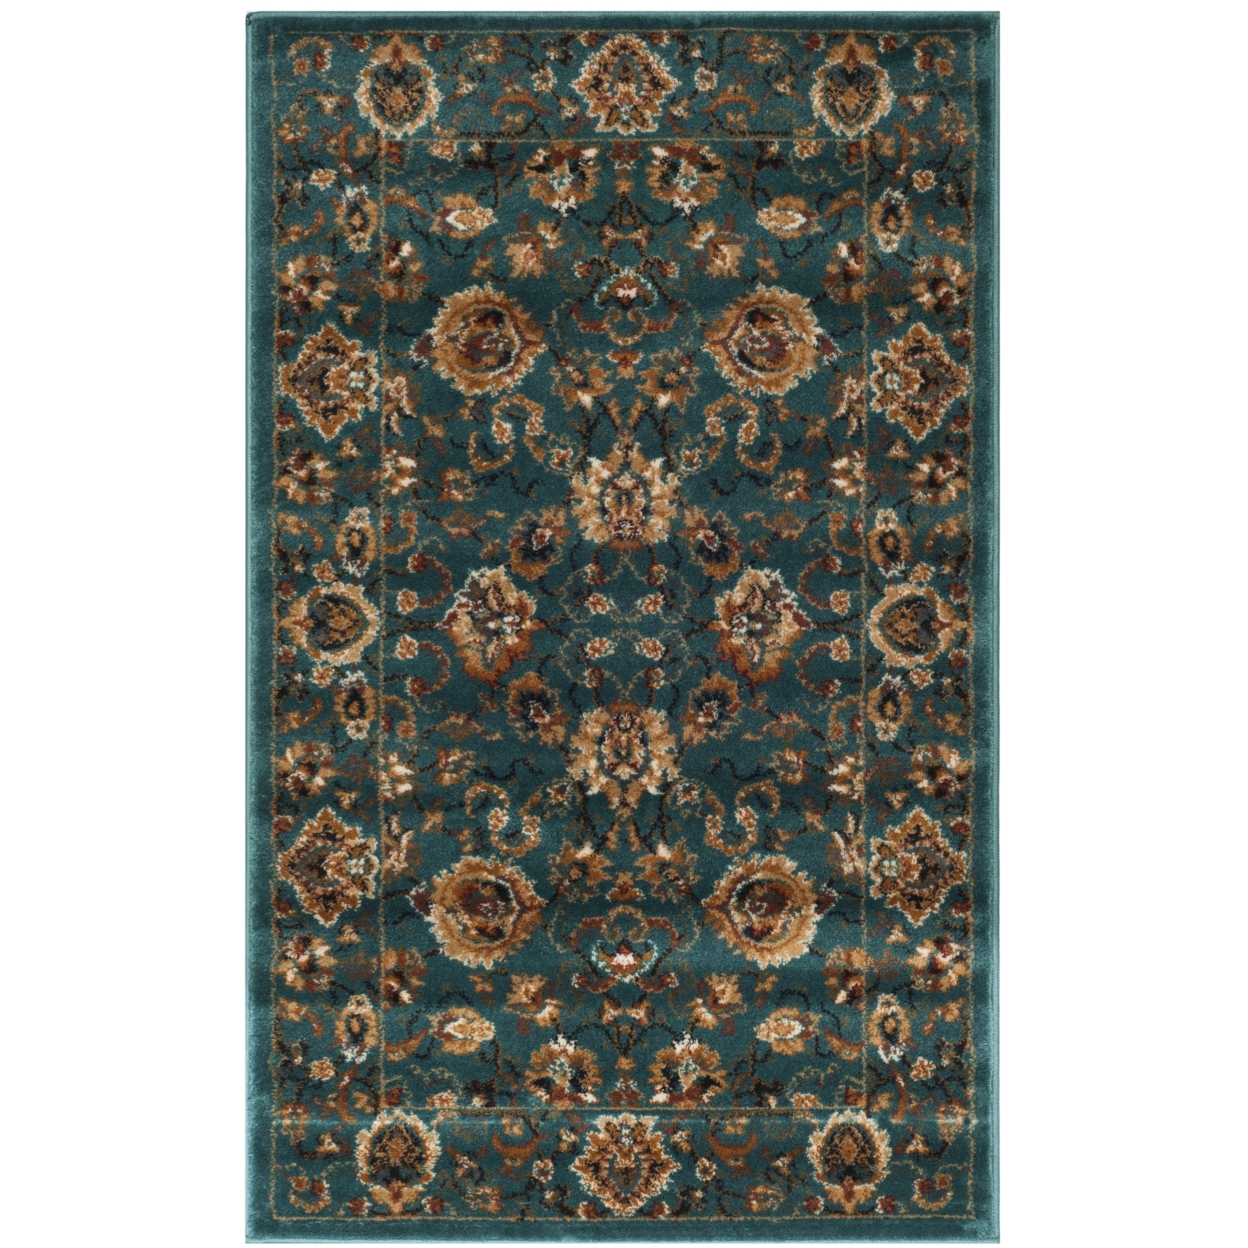 SAFAVIEH Summit Collection SMT297L Teal / Teal Rug - 3' X 5'